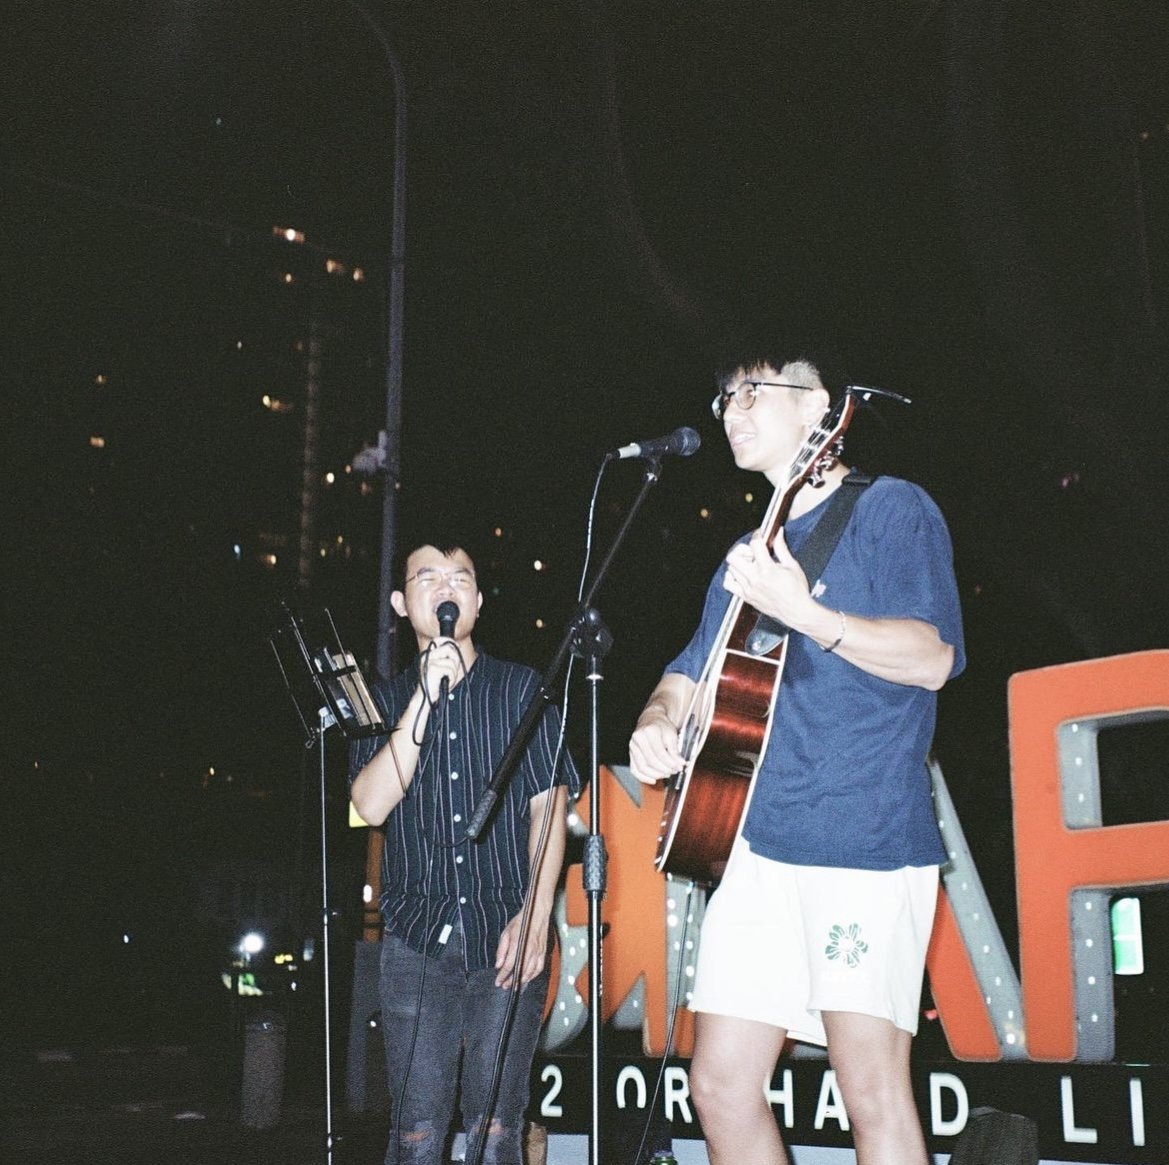 Lucas and his friend, Gaston, busking at SCAPE